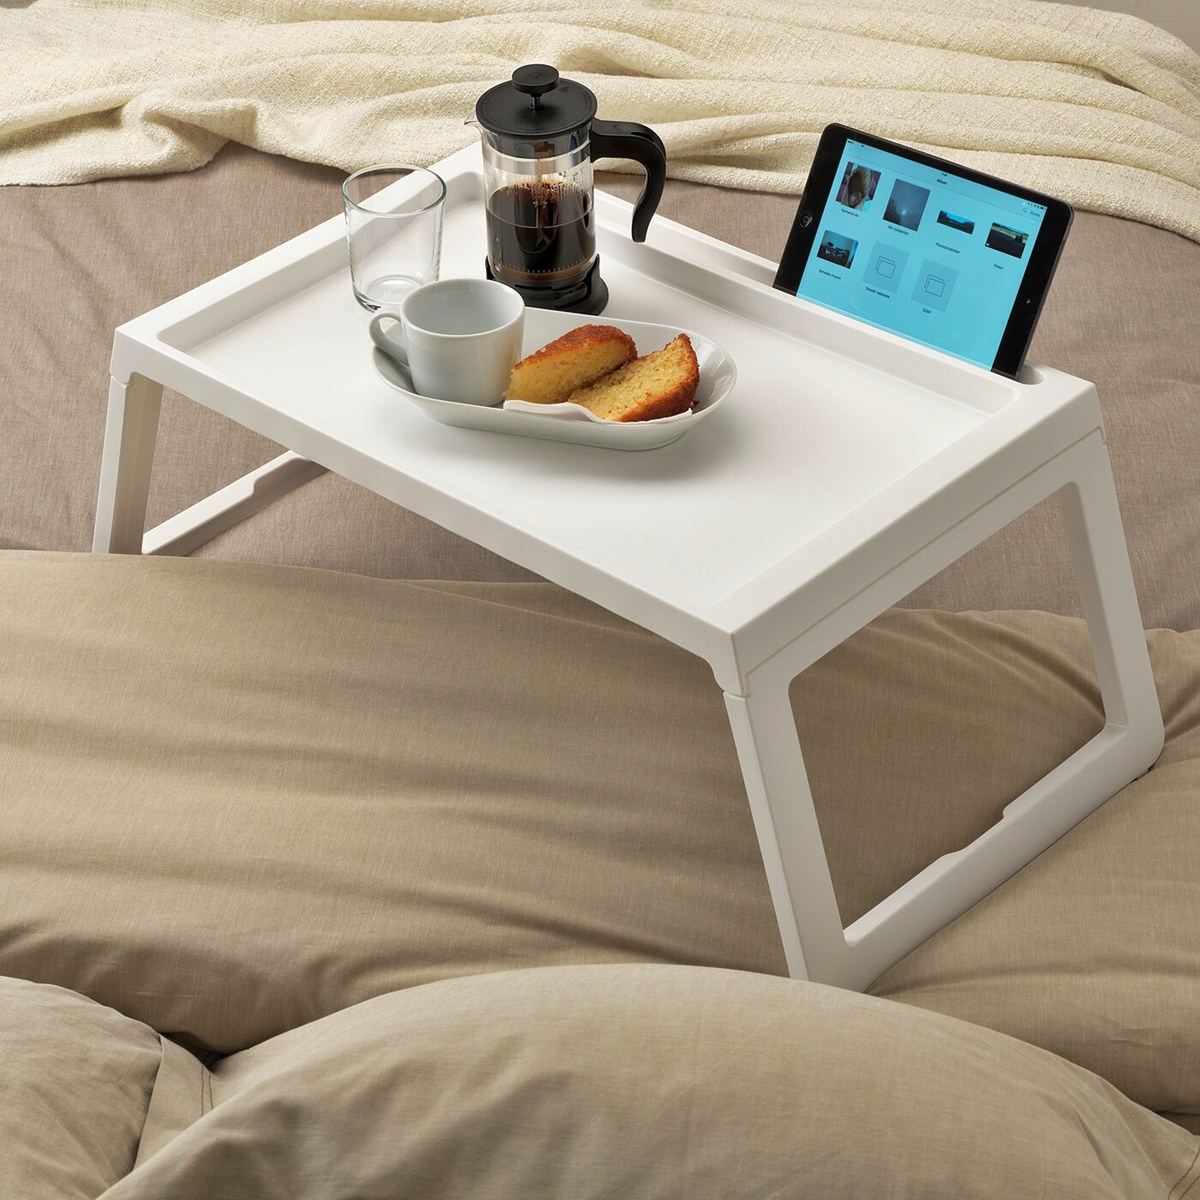 12 Superior Tray Table For Bed Or Chair for 2023